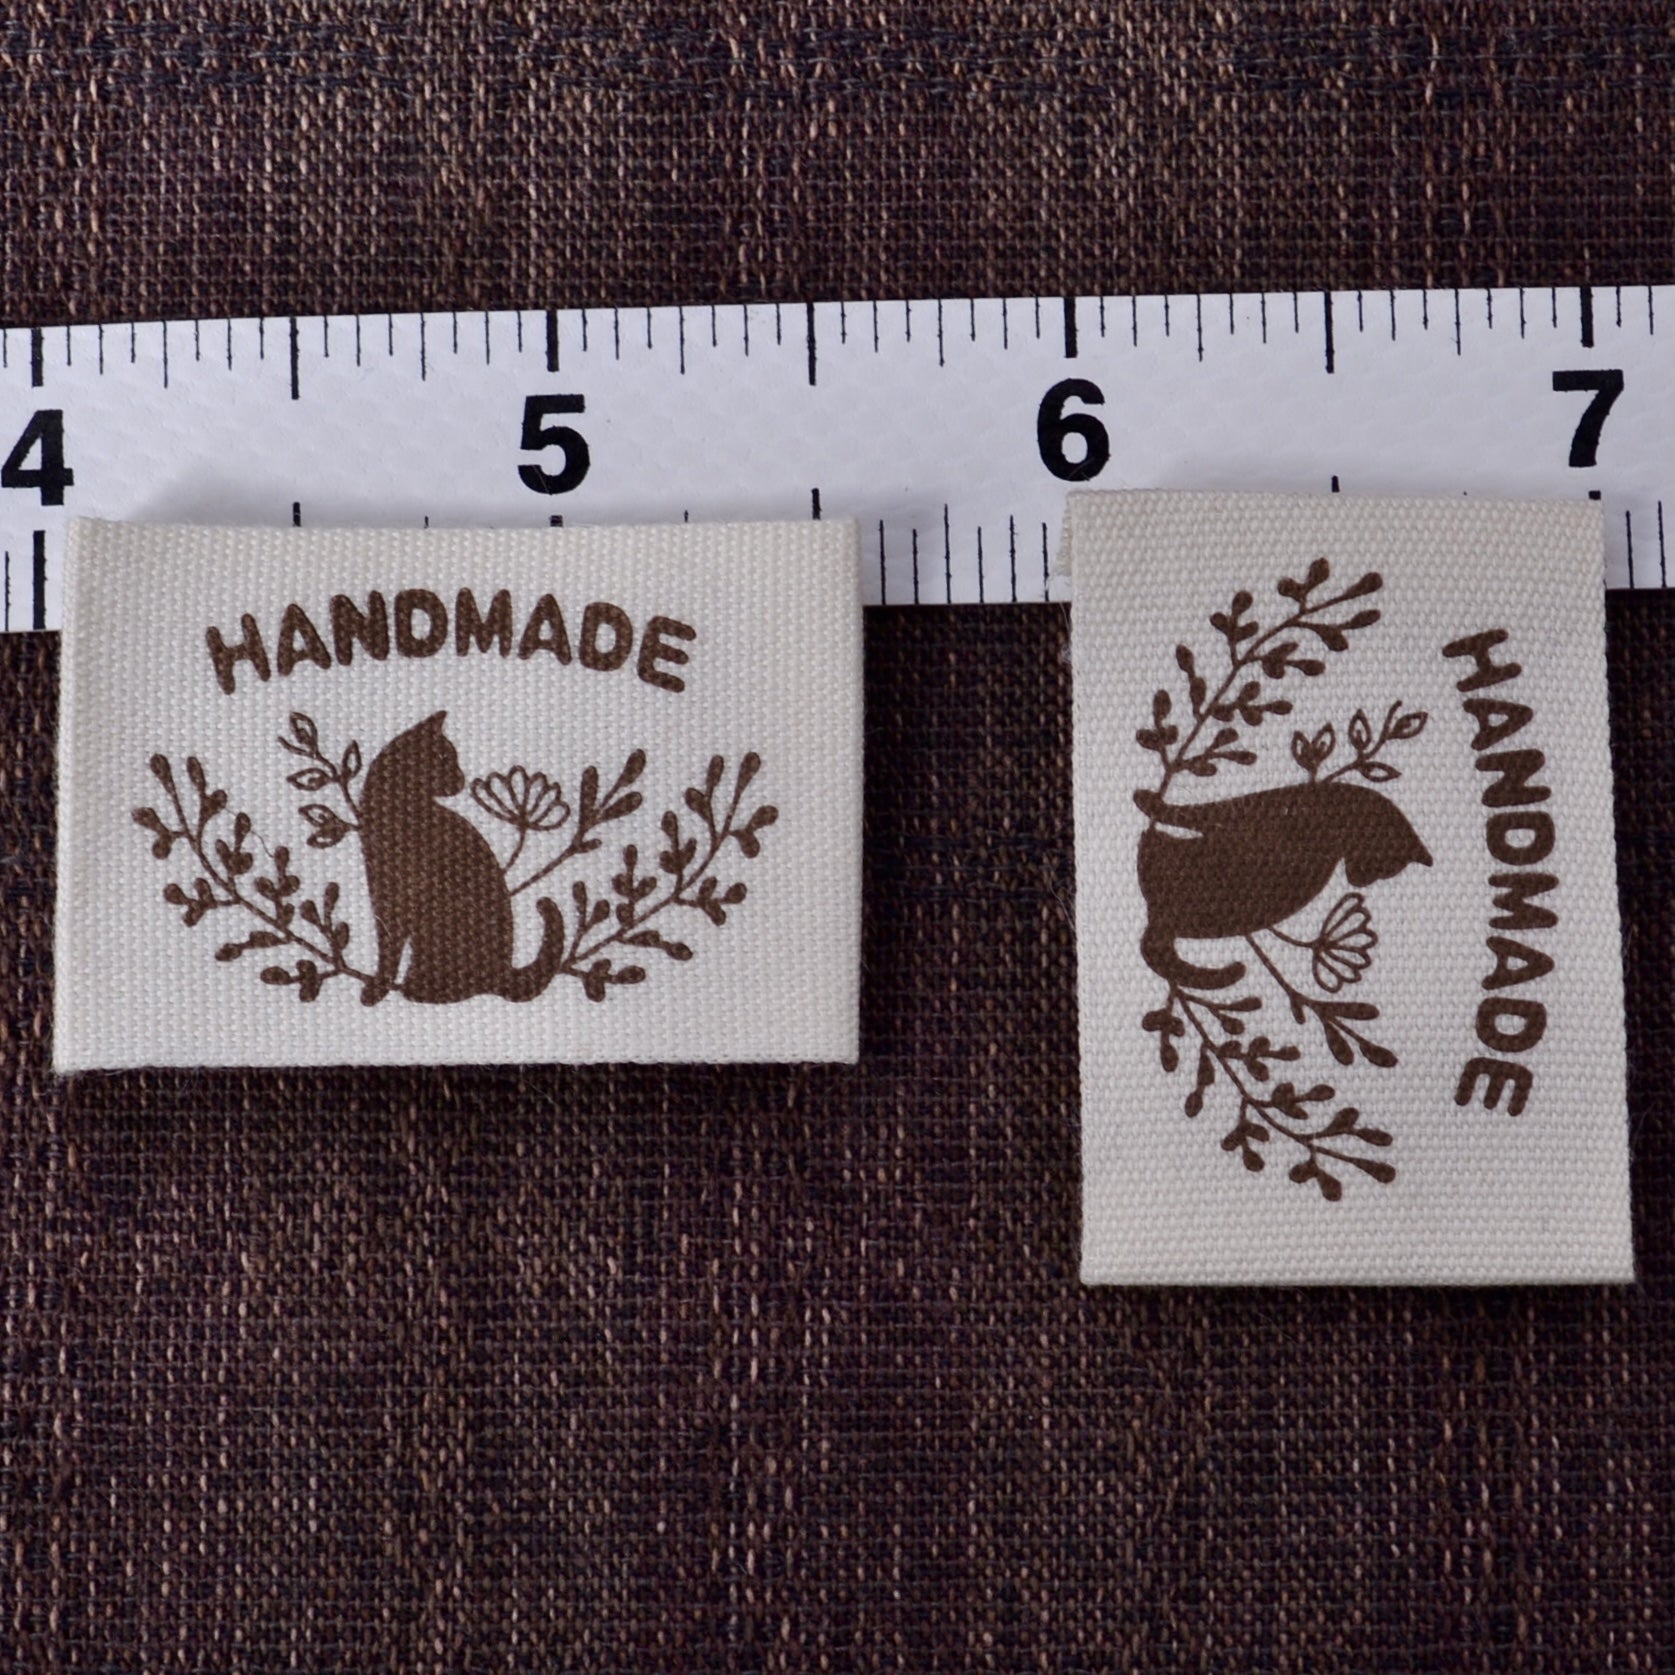 Handmade sew-in style label with cat